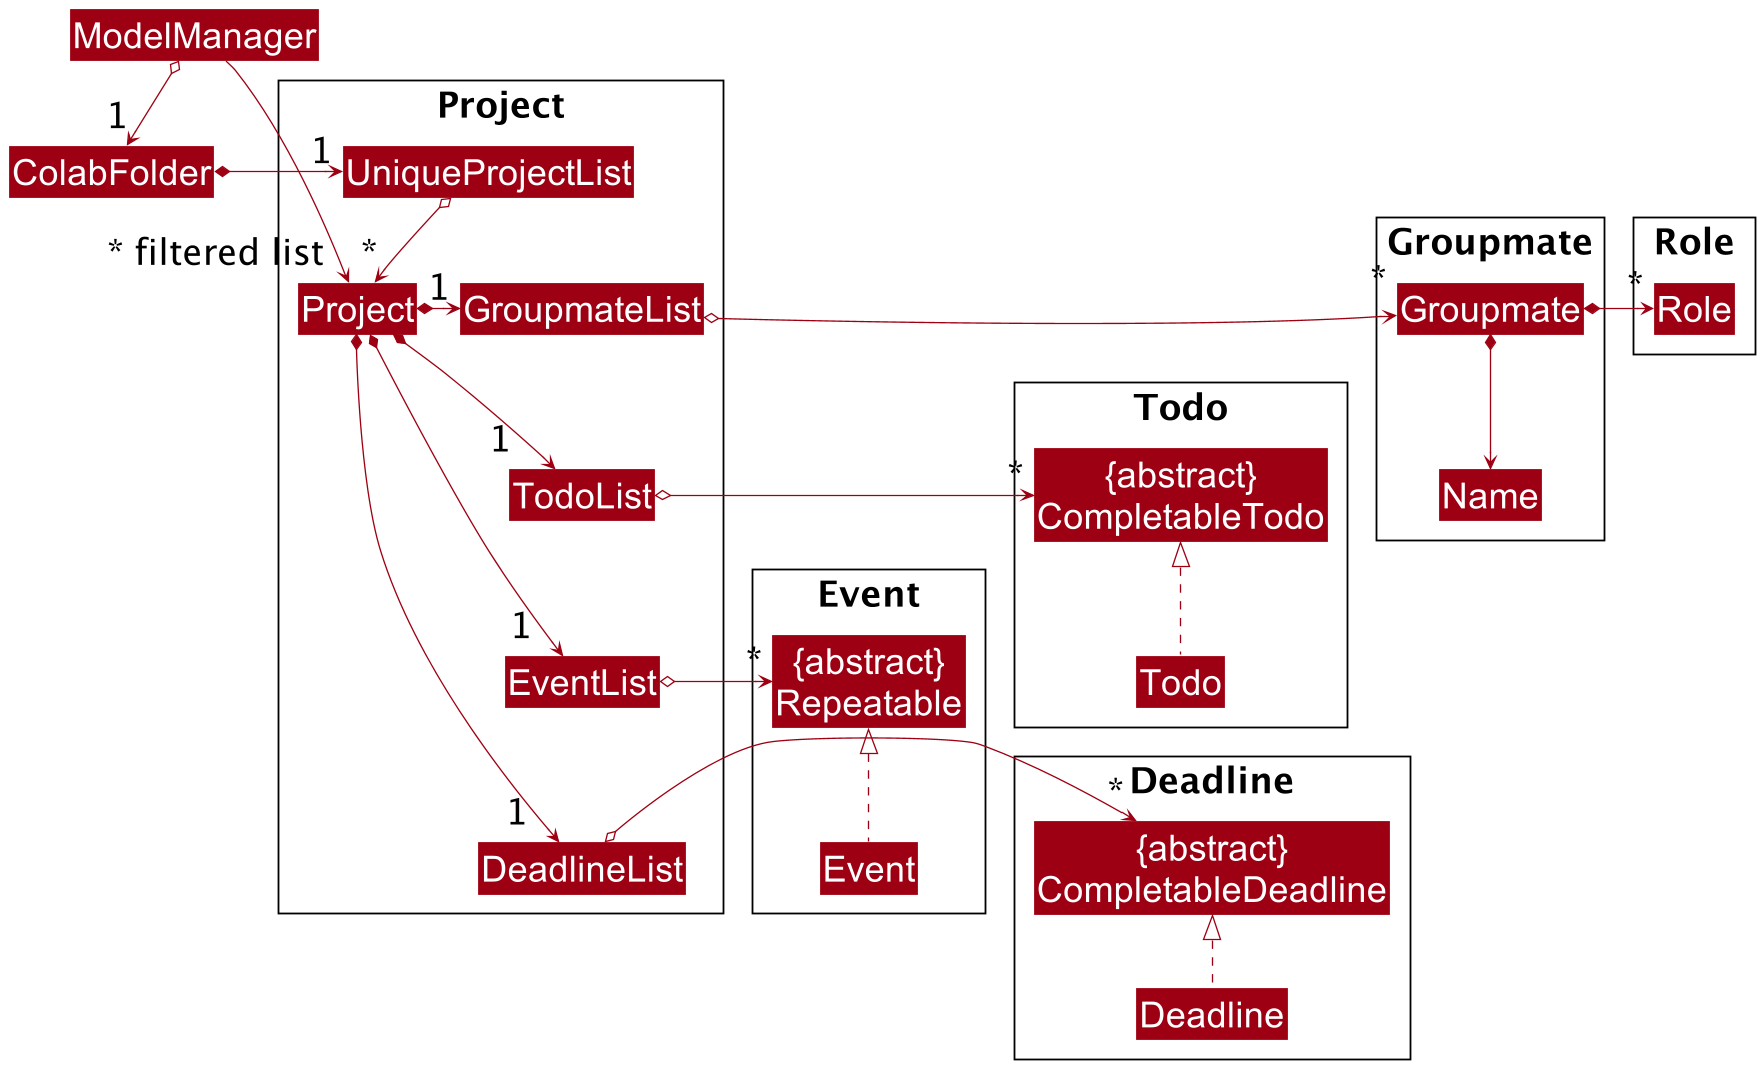 Structure of the Project Component